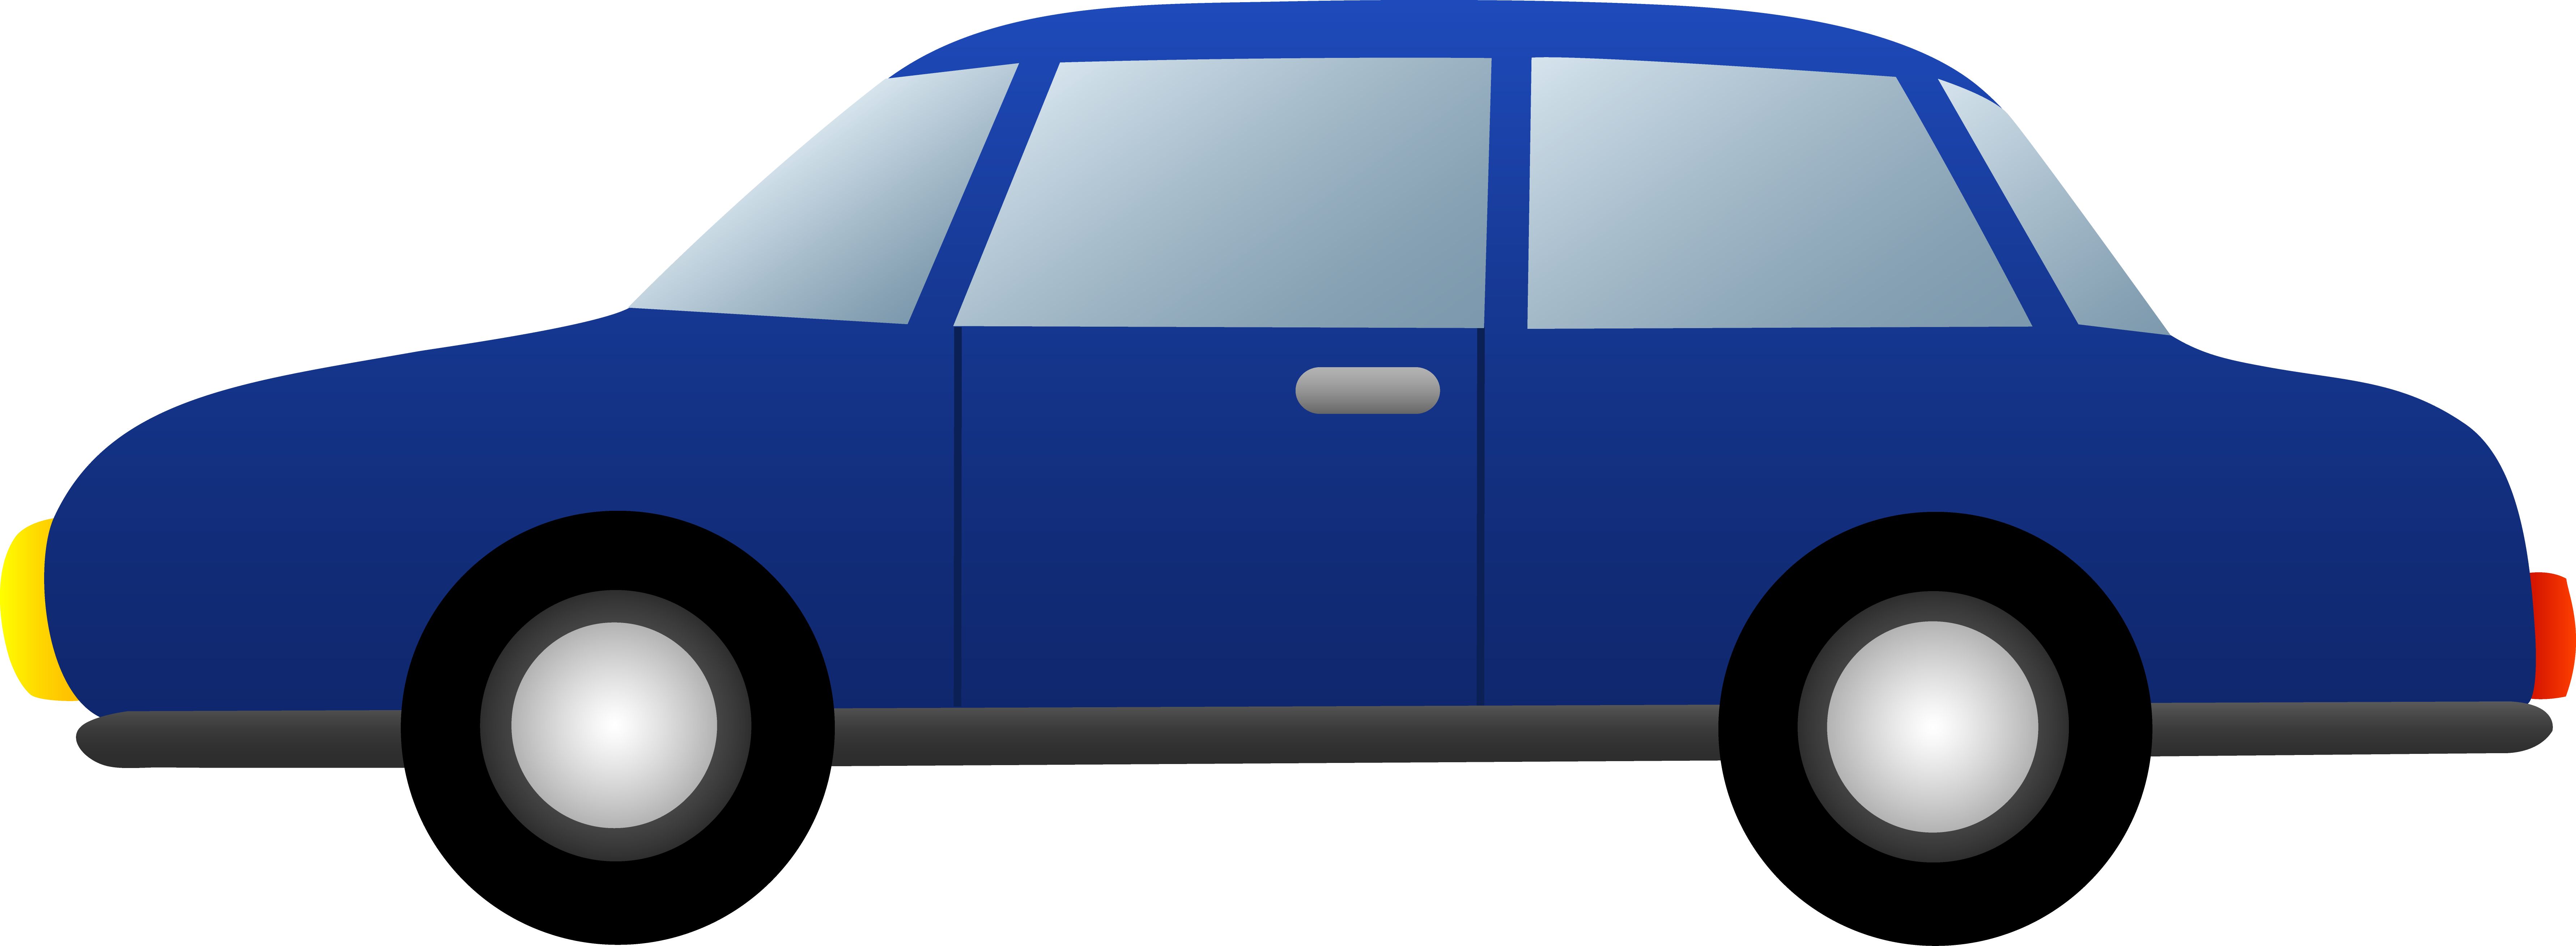 Free animated car clipart